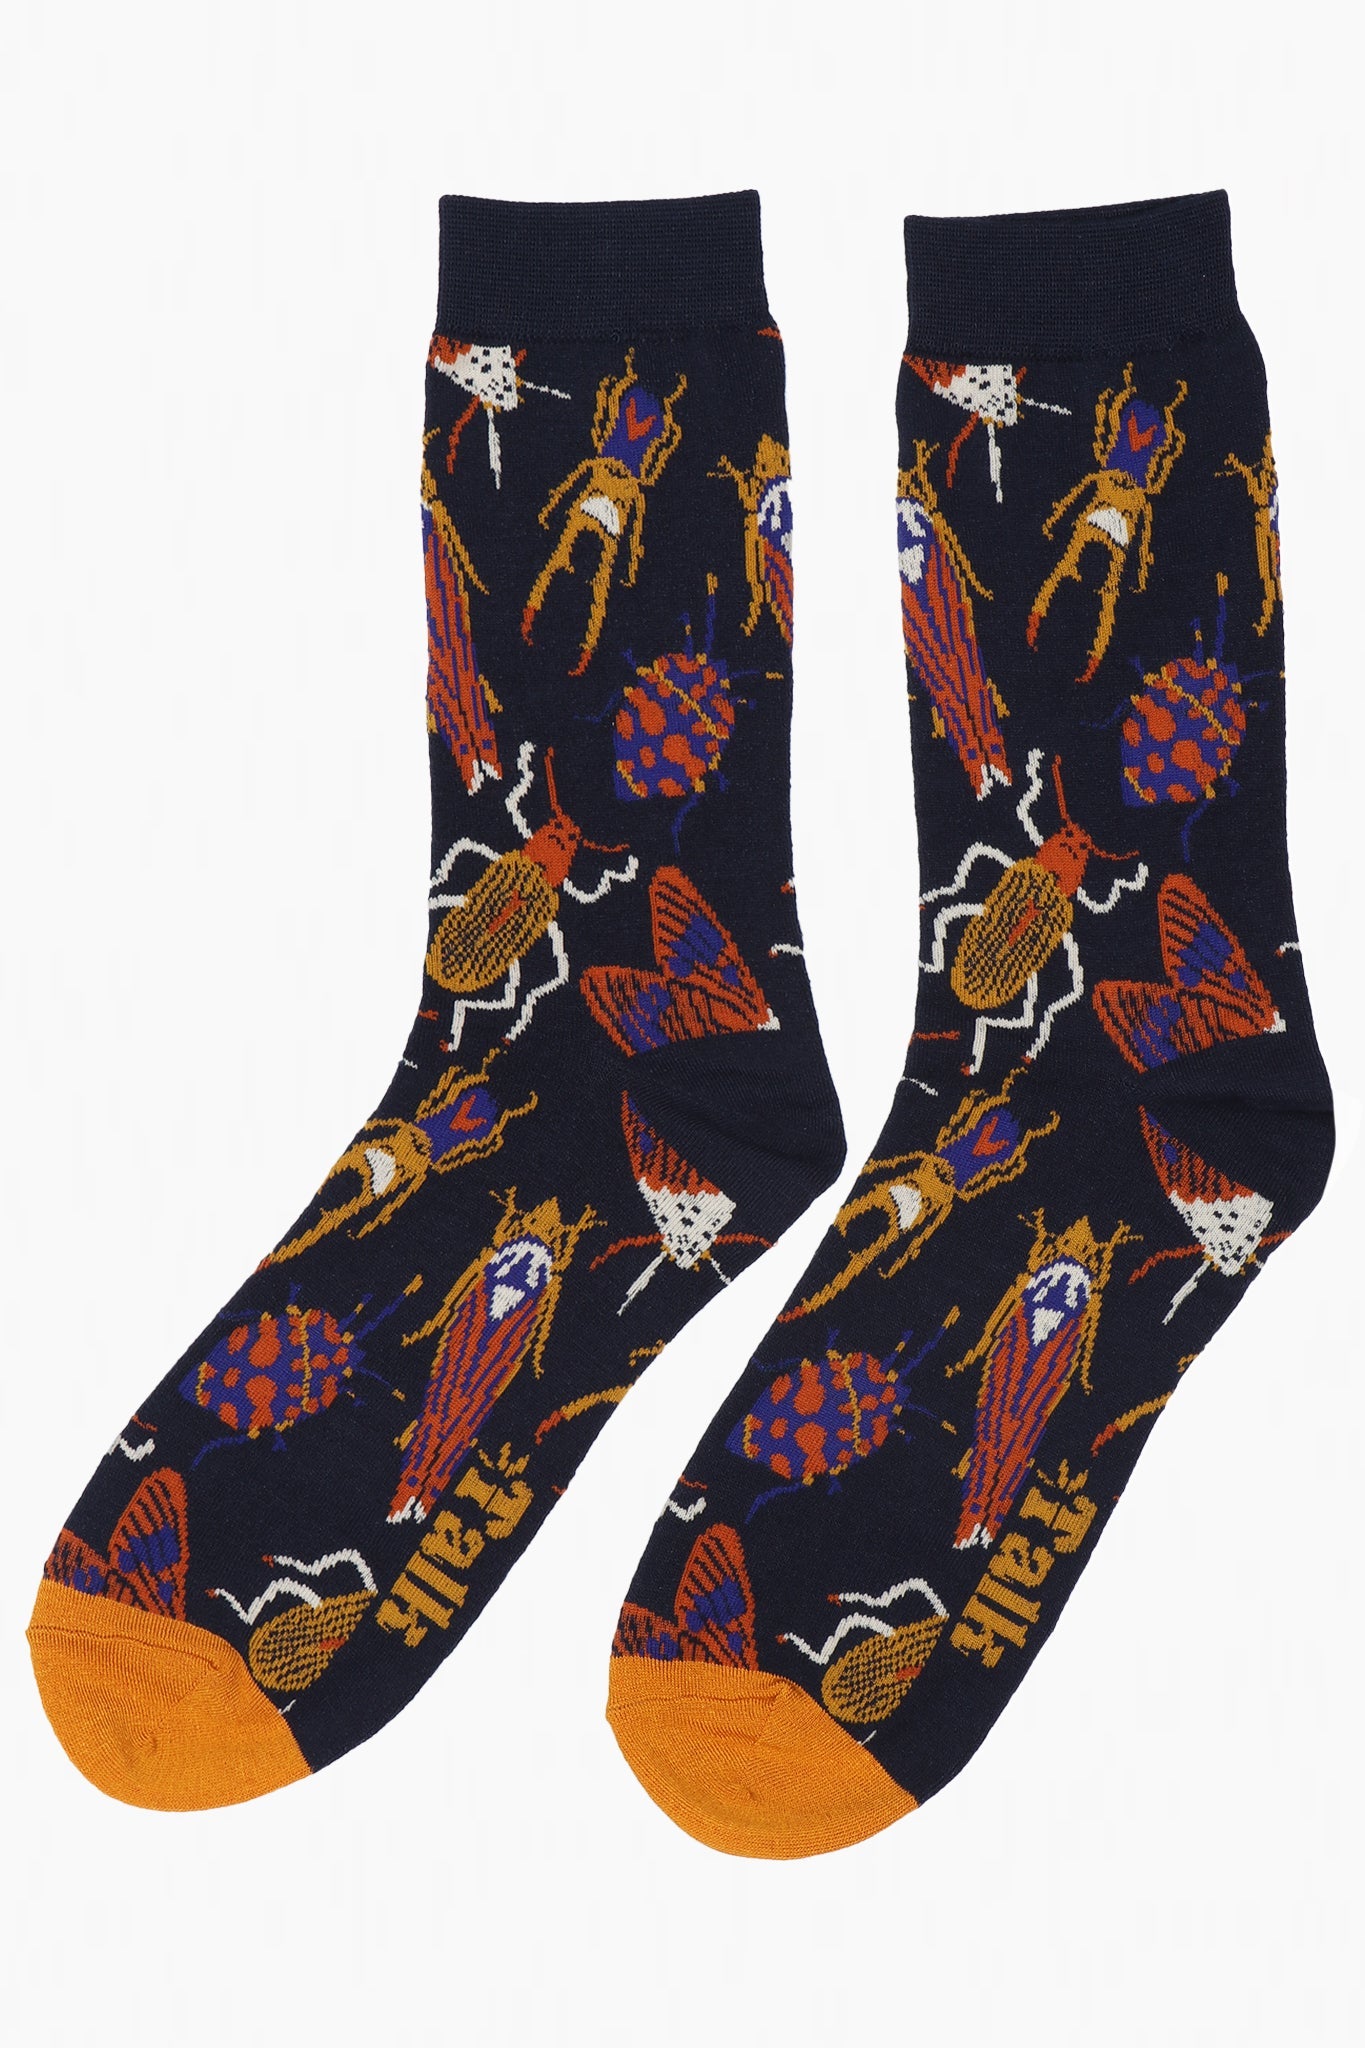 navy blue socks with an all over pattern of insects, beetles and moths in orange and yellow